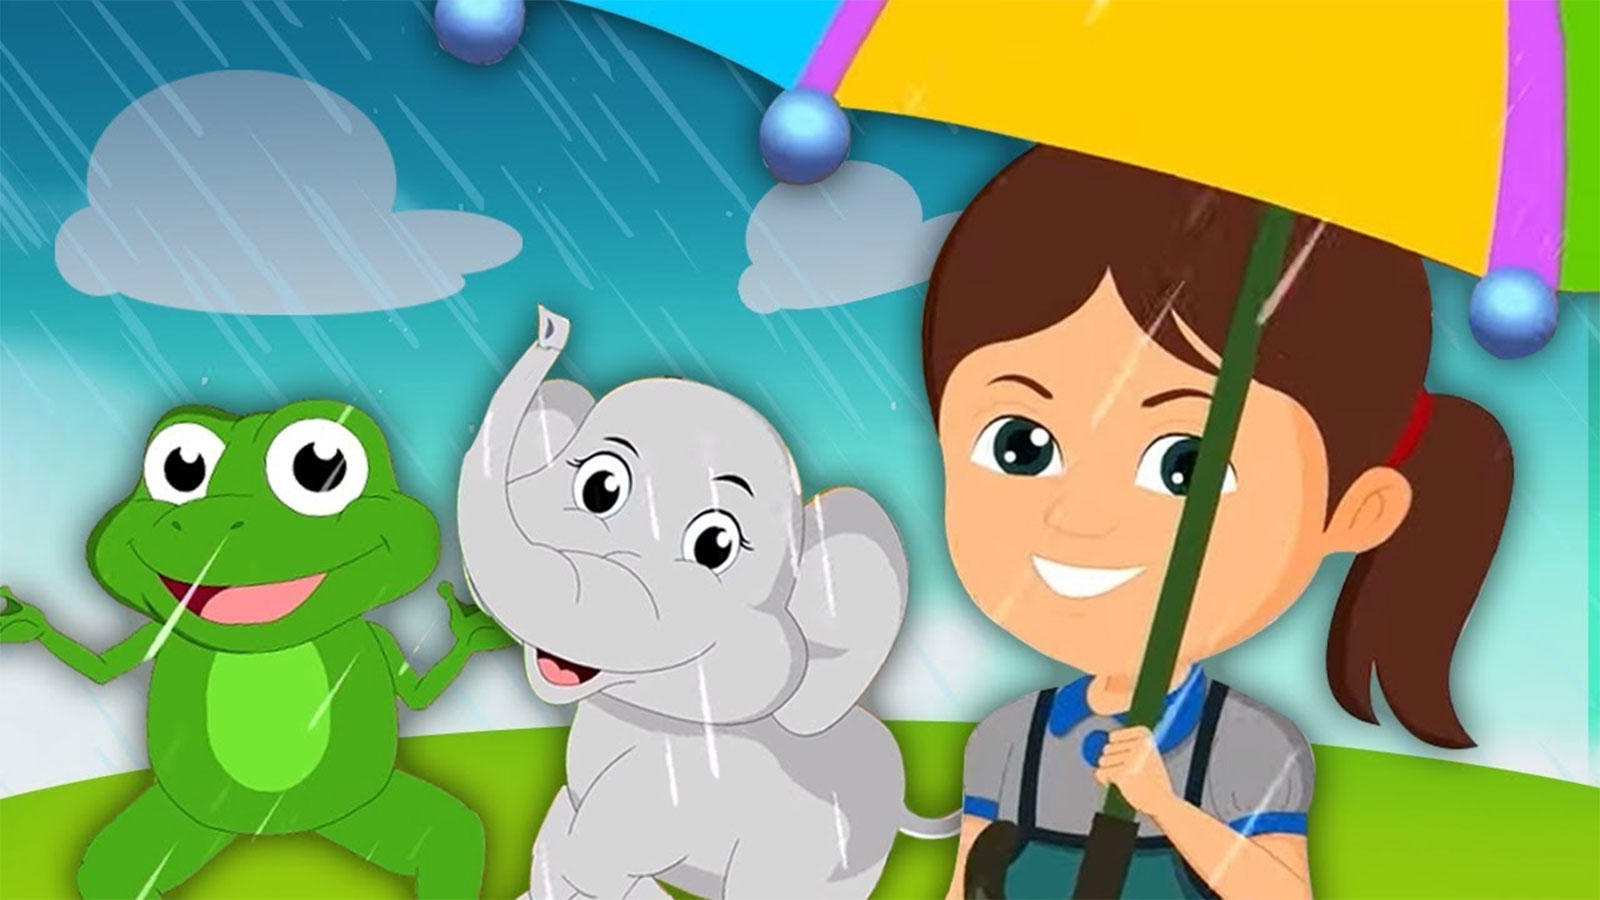 Watch Out Children Hindi Nursery Rhyme 'Barish Aayi Cham Cham Cham' for  Kids - Check out Fun Kids Nursery Rhymes And Baby Songs In Hindi |  Entertainment - Times of India Videos